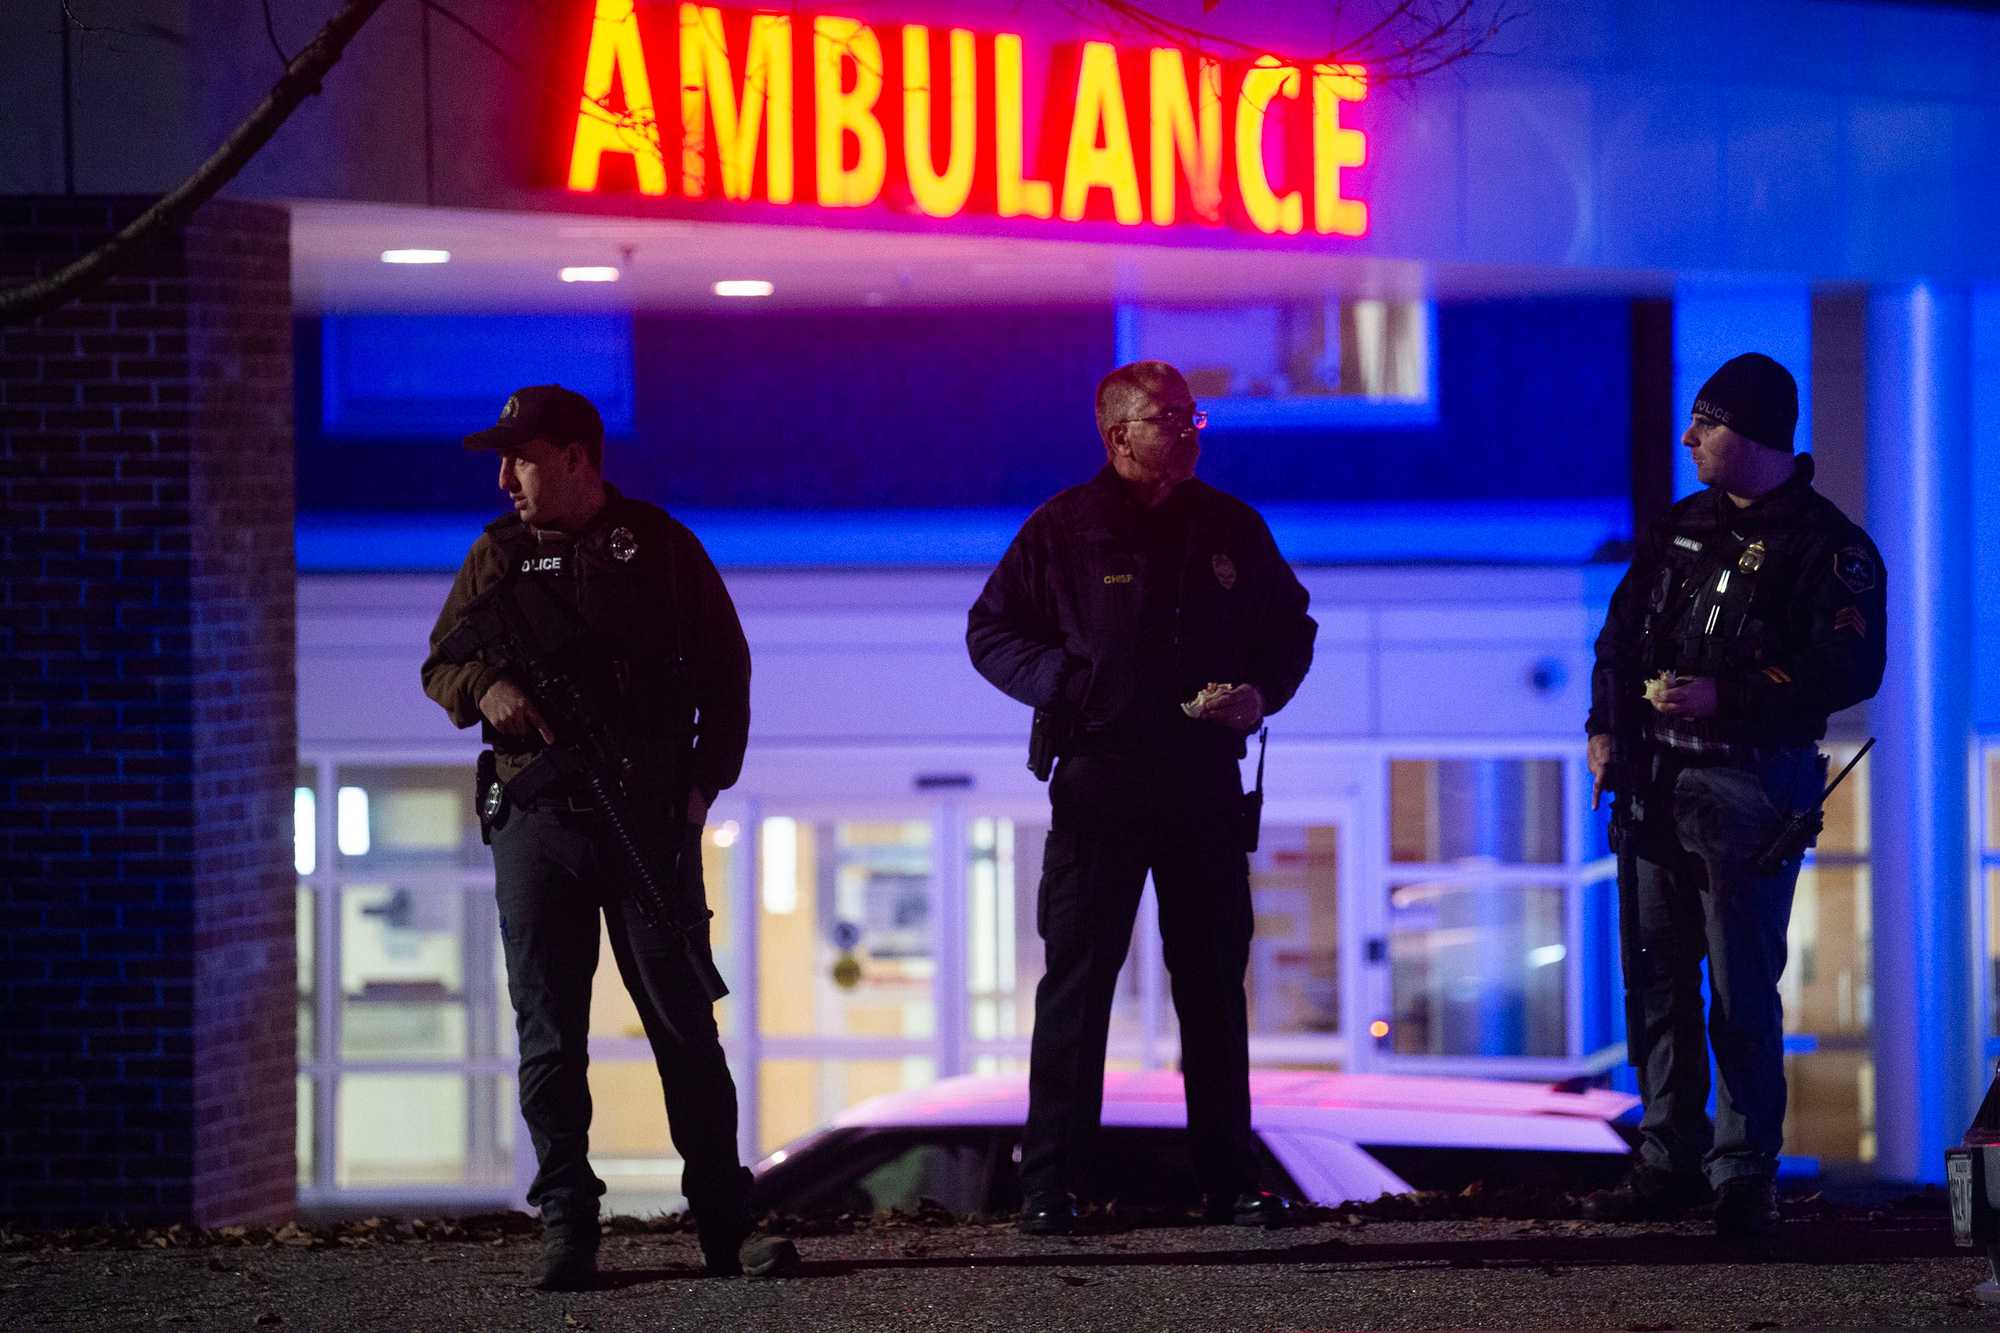 Police officers were seen at Central Maine Medical Center in Lewiston Wednesday evening.